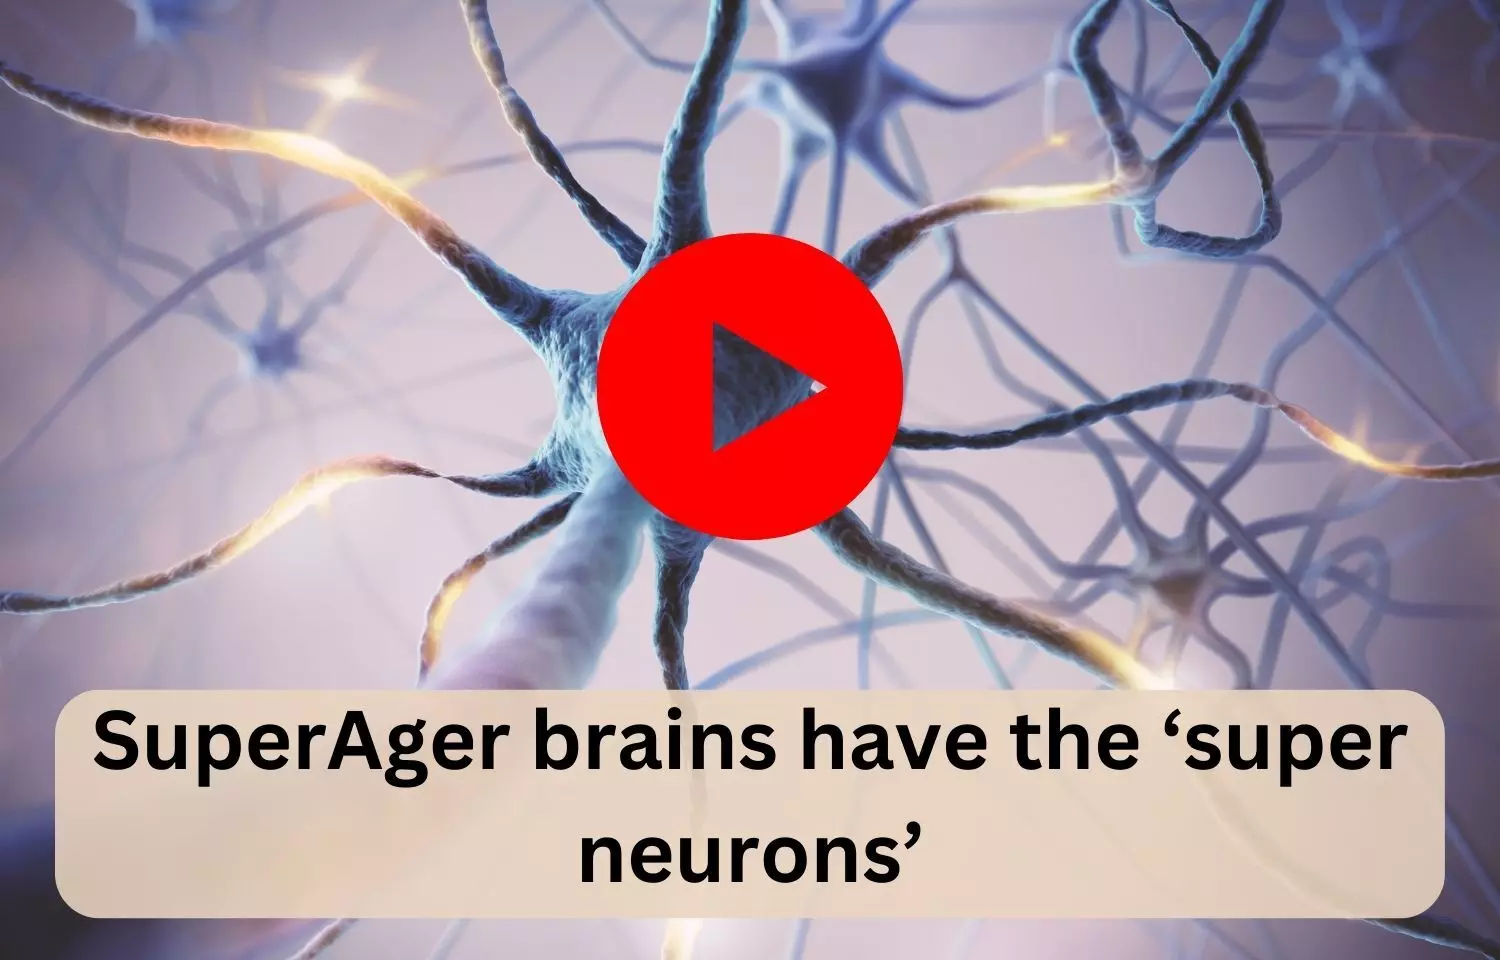 SuperAger brains have the super neurons